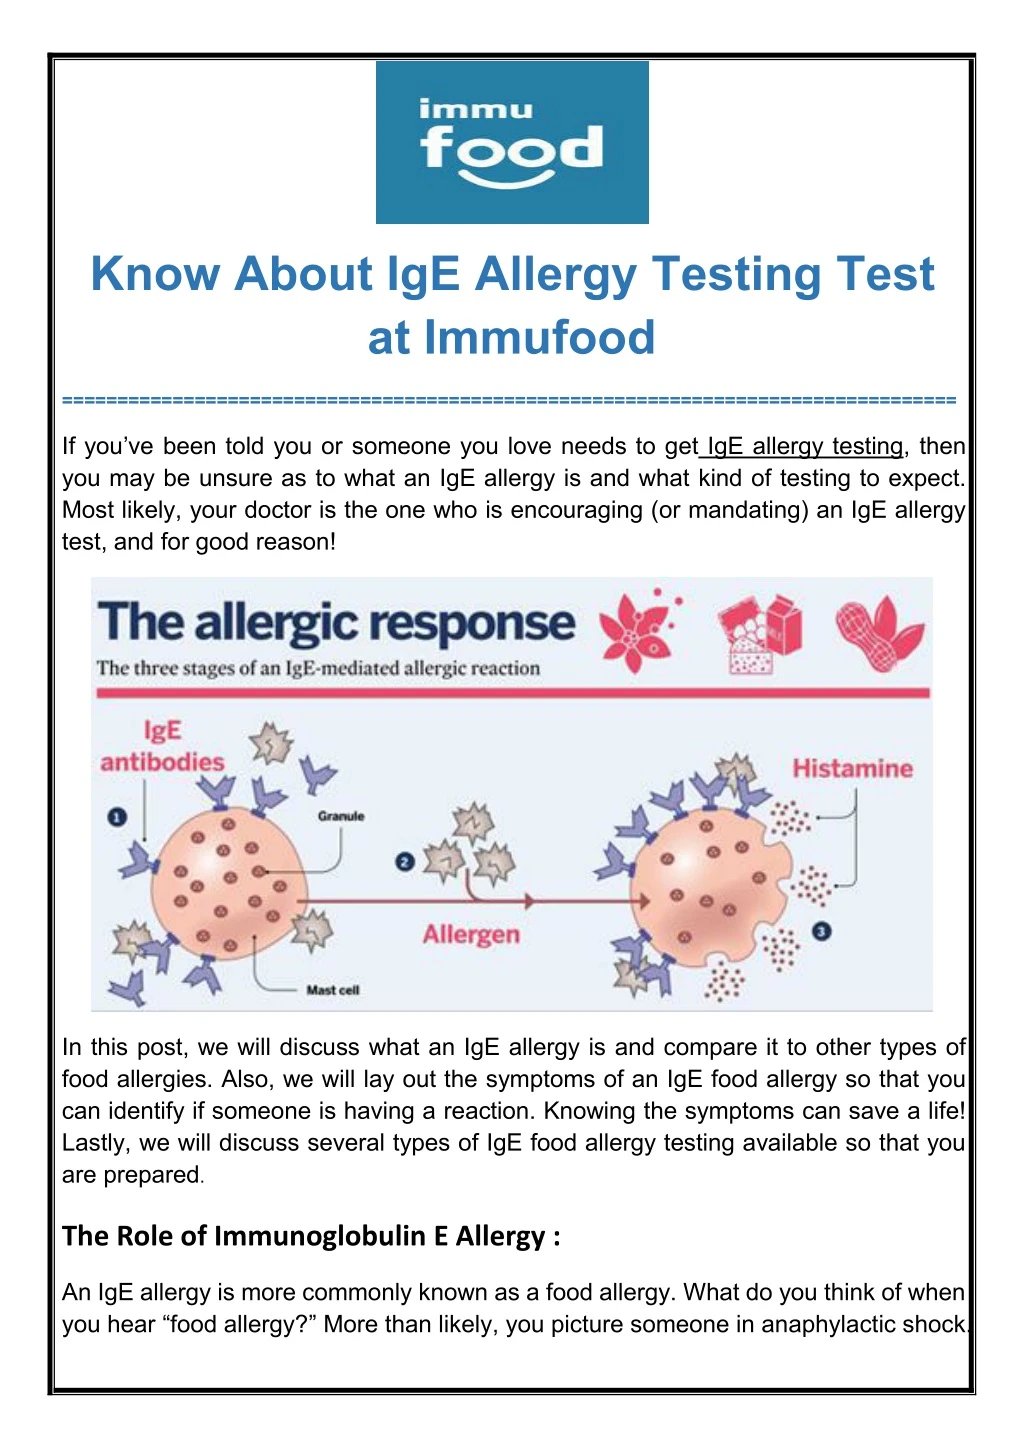 know about ige allergy testing test at immufood